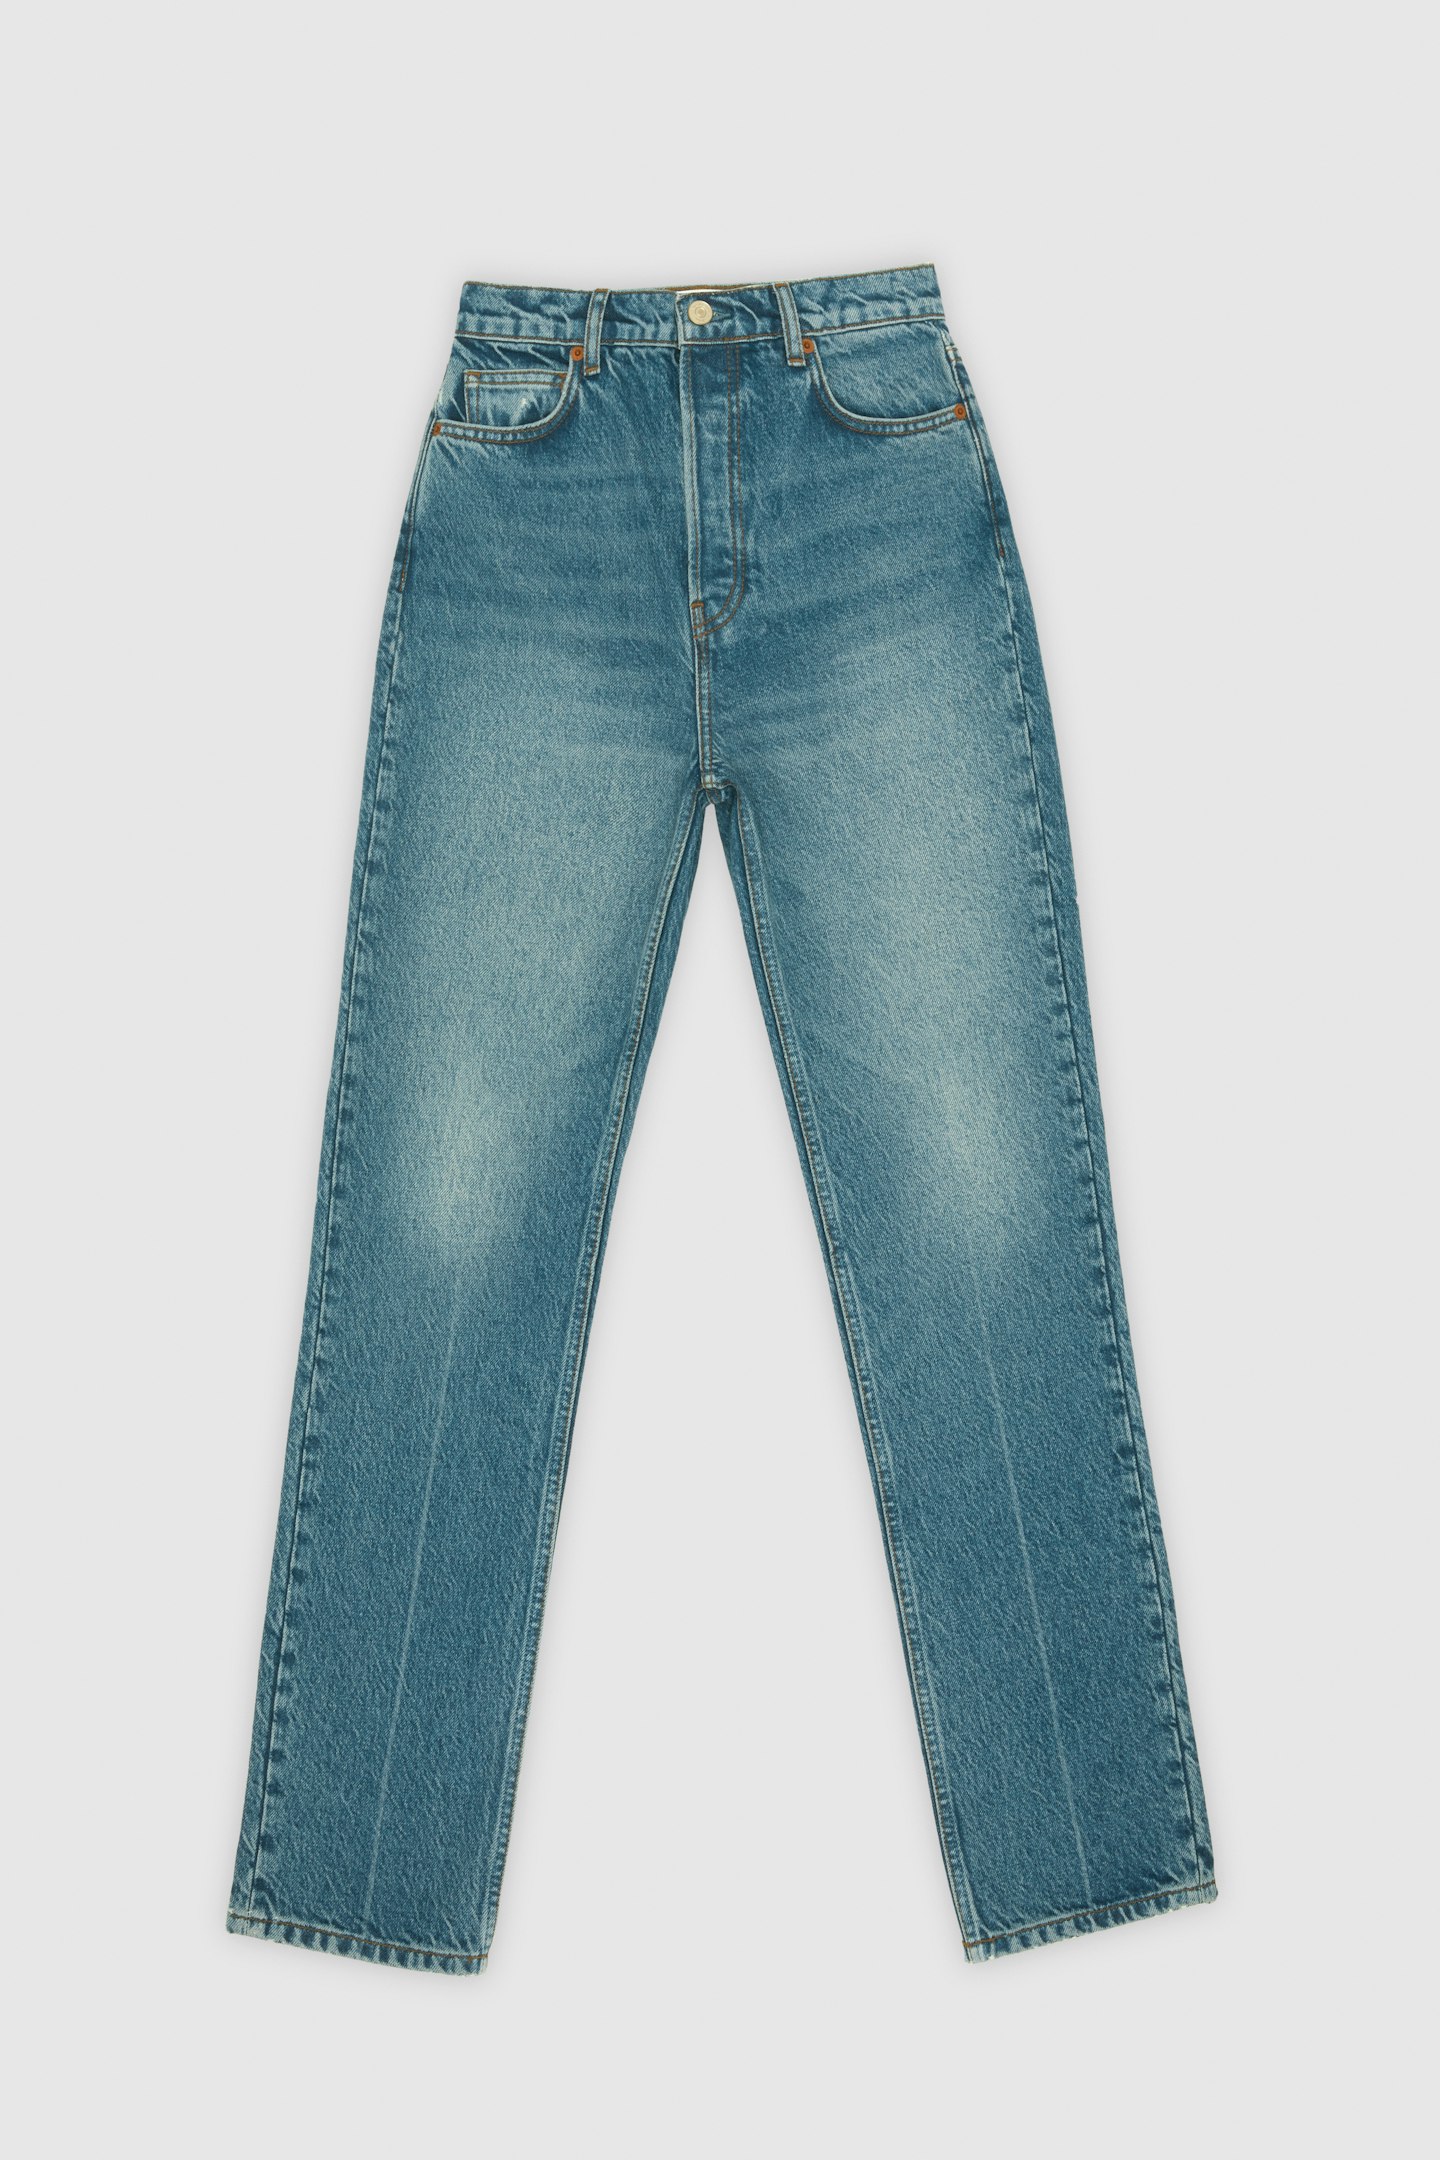 Reformation, Cynthia High-Rise Straight Jeans, £140